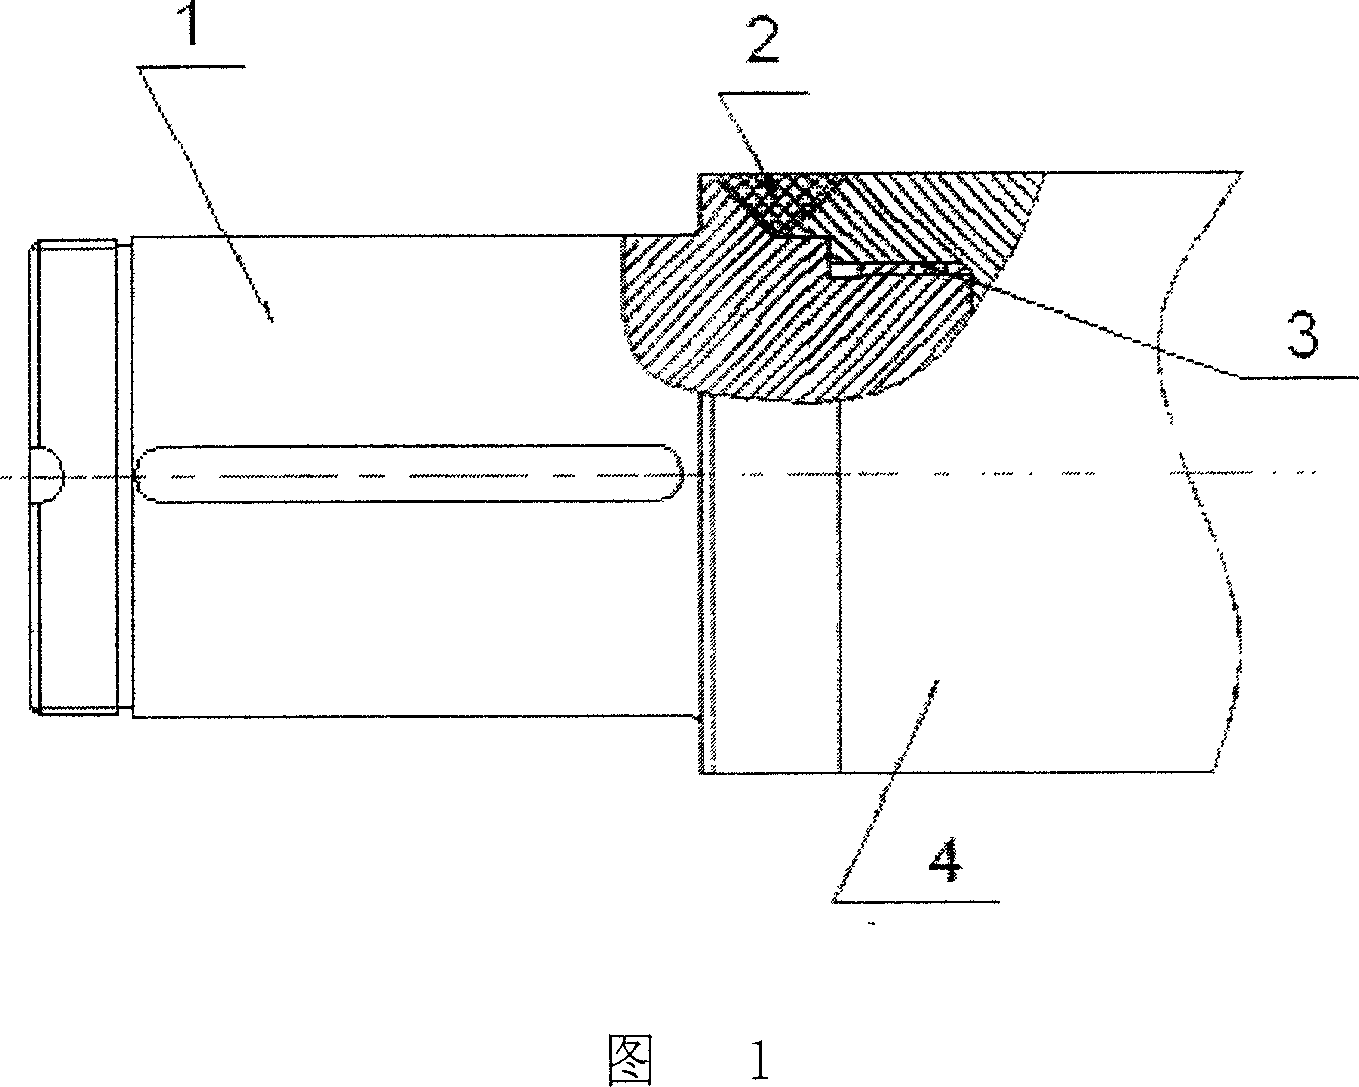 Renovation technique of steam turbine rotor shaft fracture